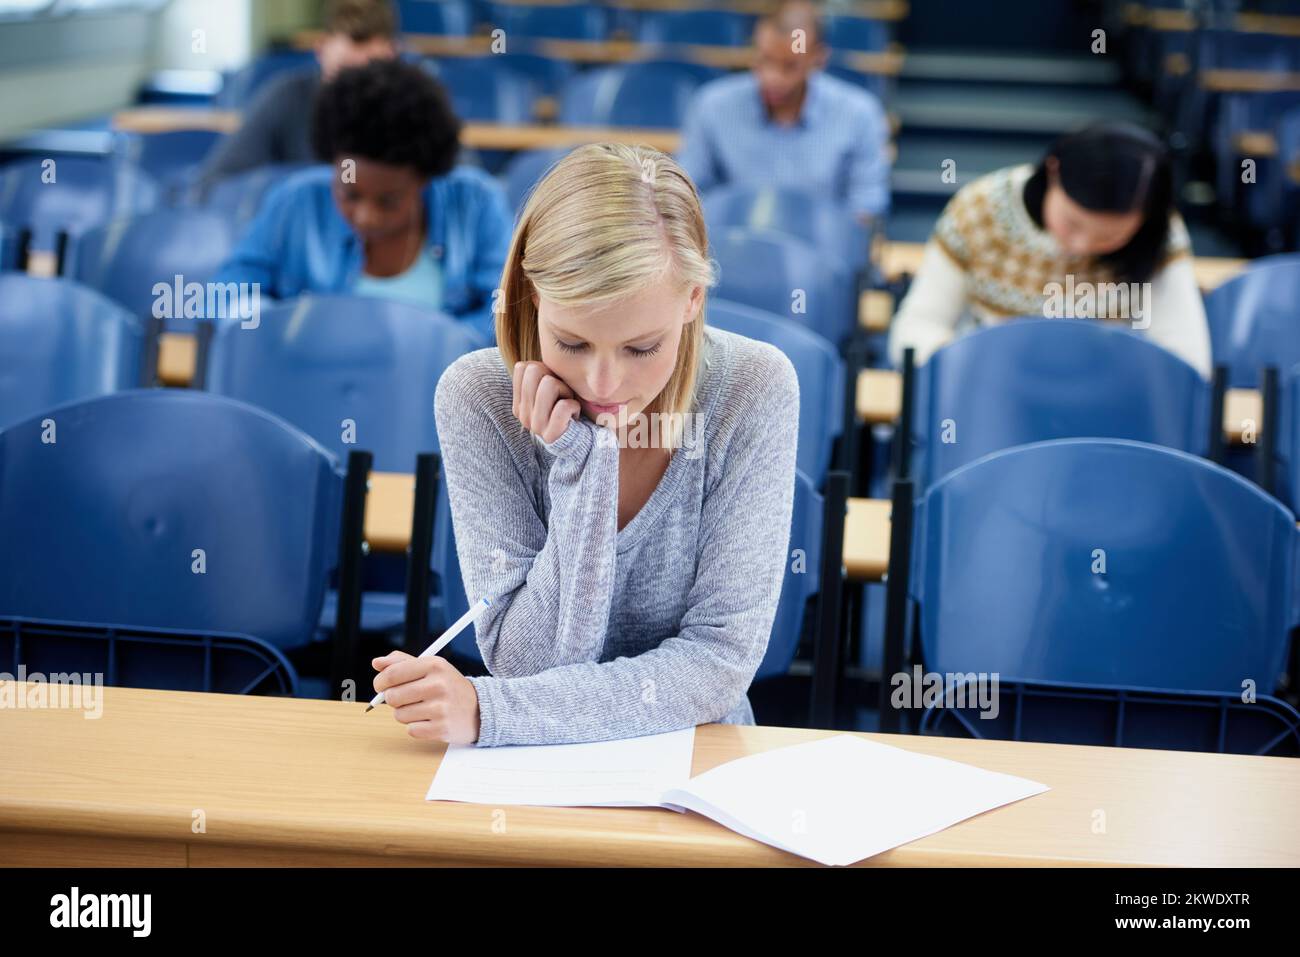 Im a bit stumped on this question. an attractive college student studying in a lecture hall. Stock Photo